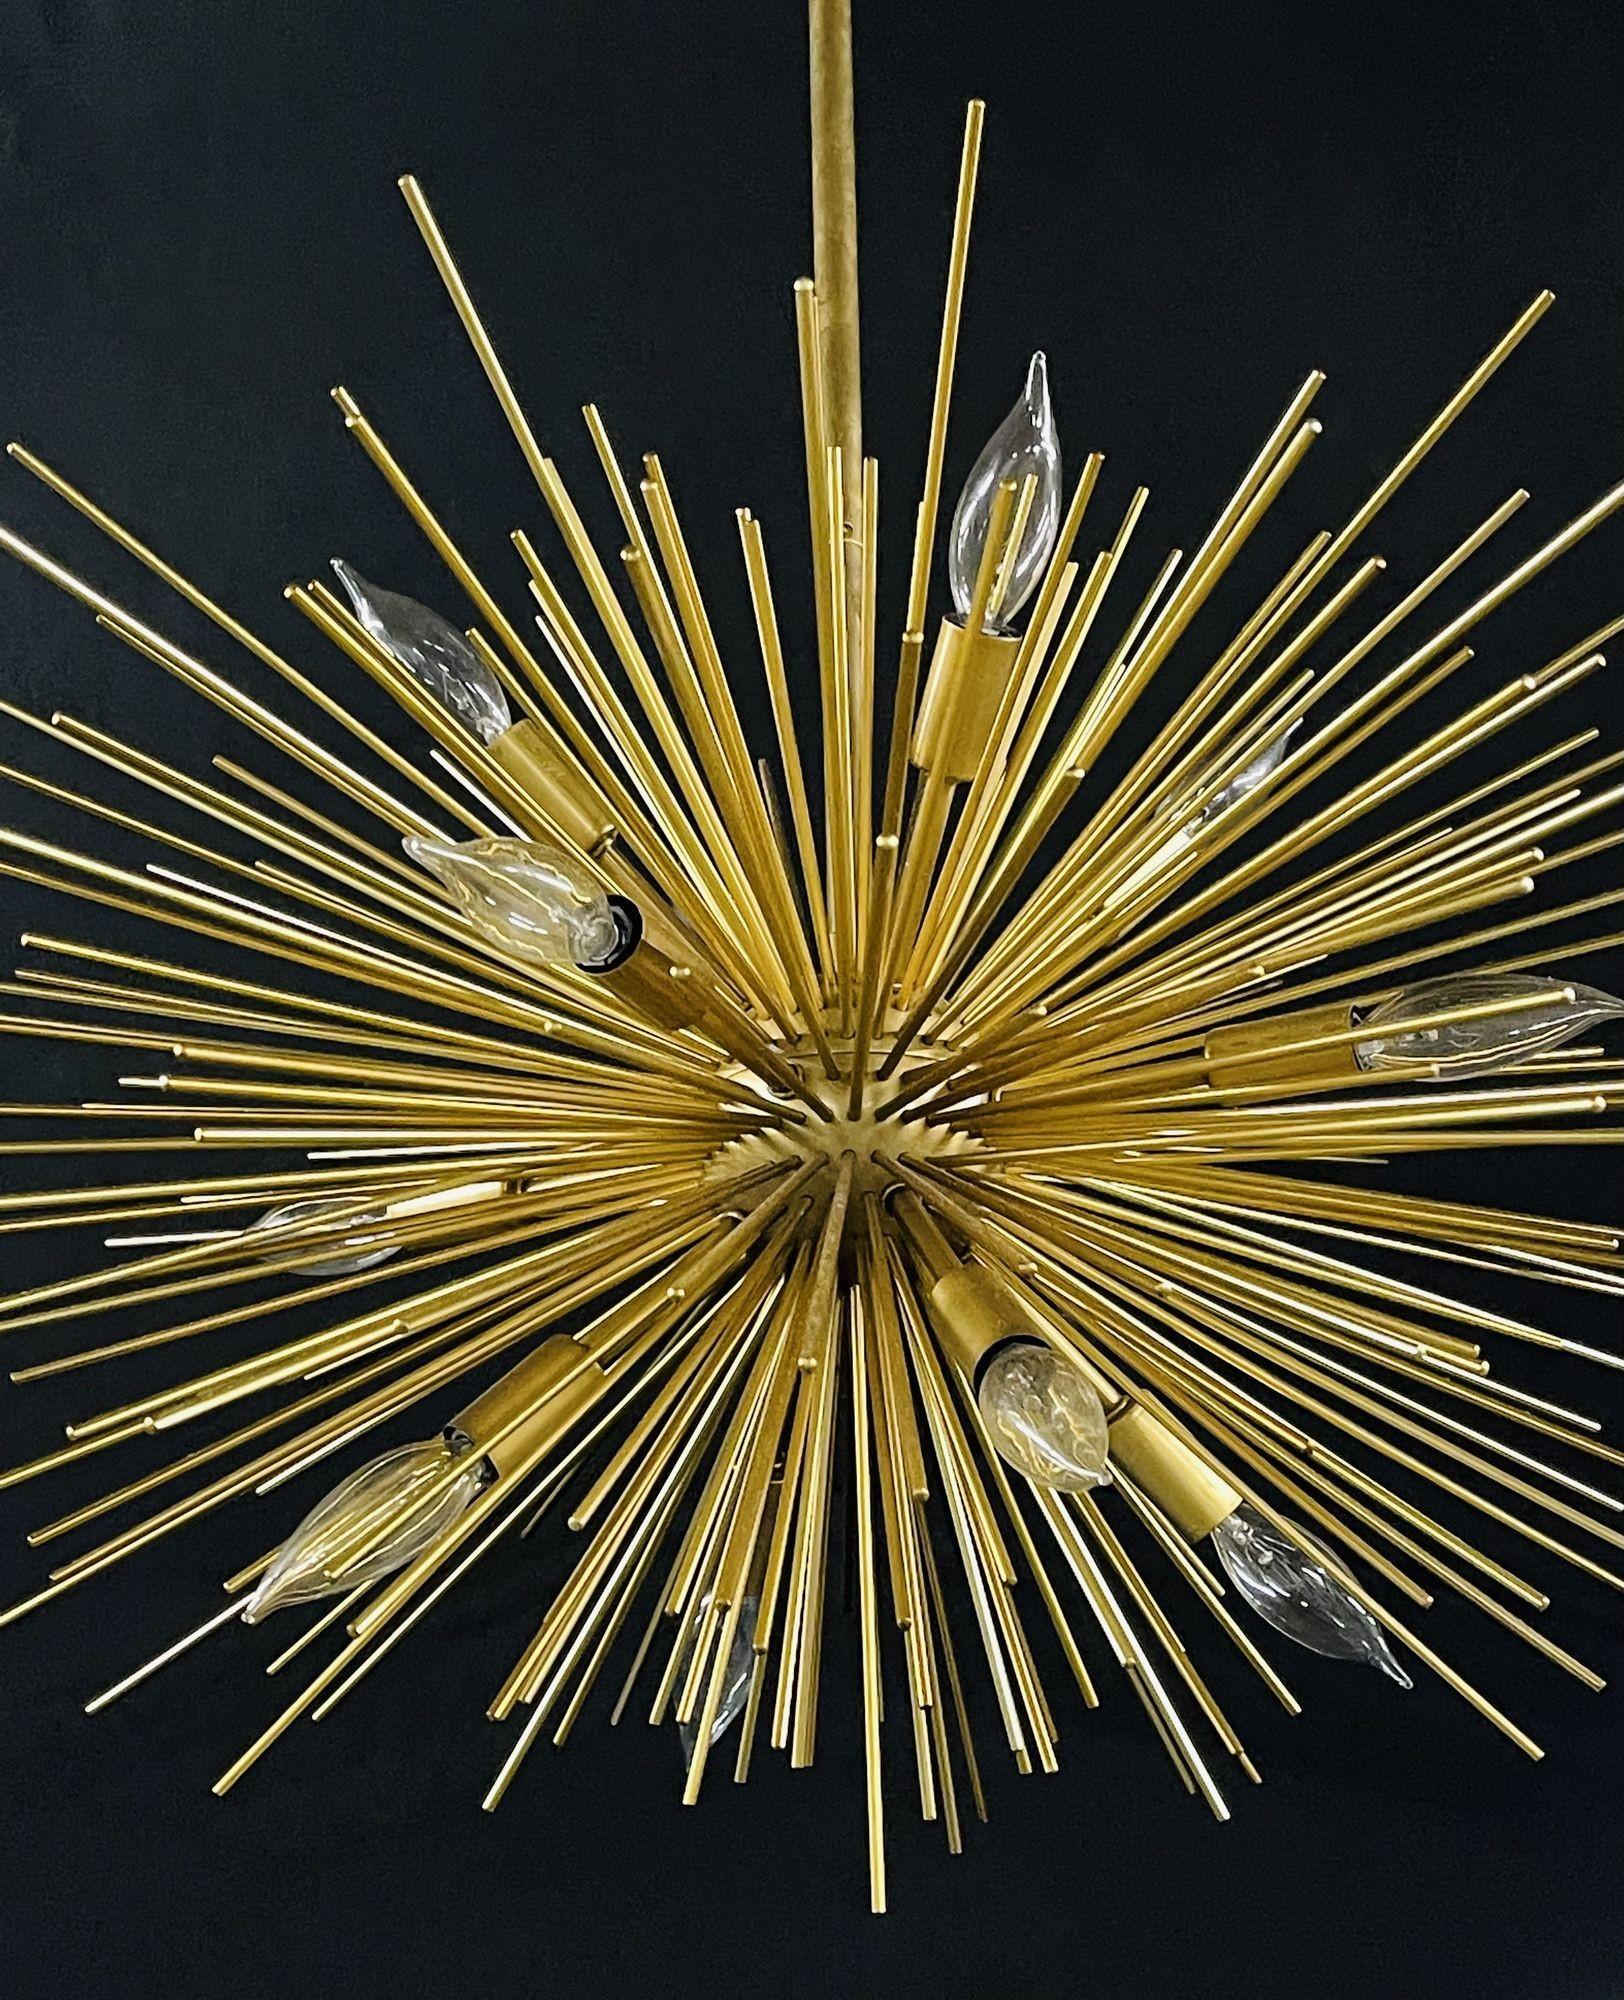 A modern bronze 12 light chandelier, Zanadoo Arteriors
 
Opulent, futuristic and bursting with retro flair, the Arteriors Zanadoo Chandelier recalls the early days of space exploration and innovation. Mid-century aesthetics combine an explosion of